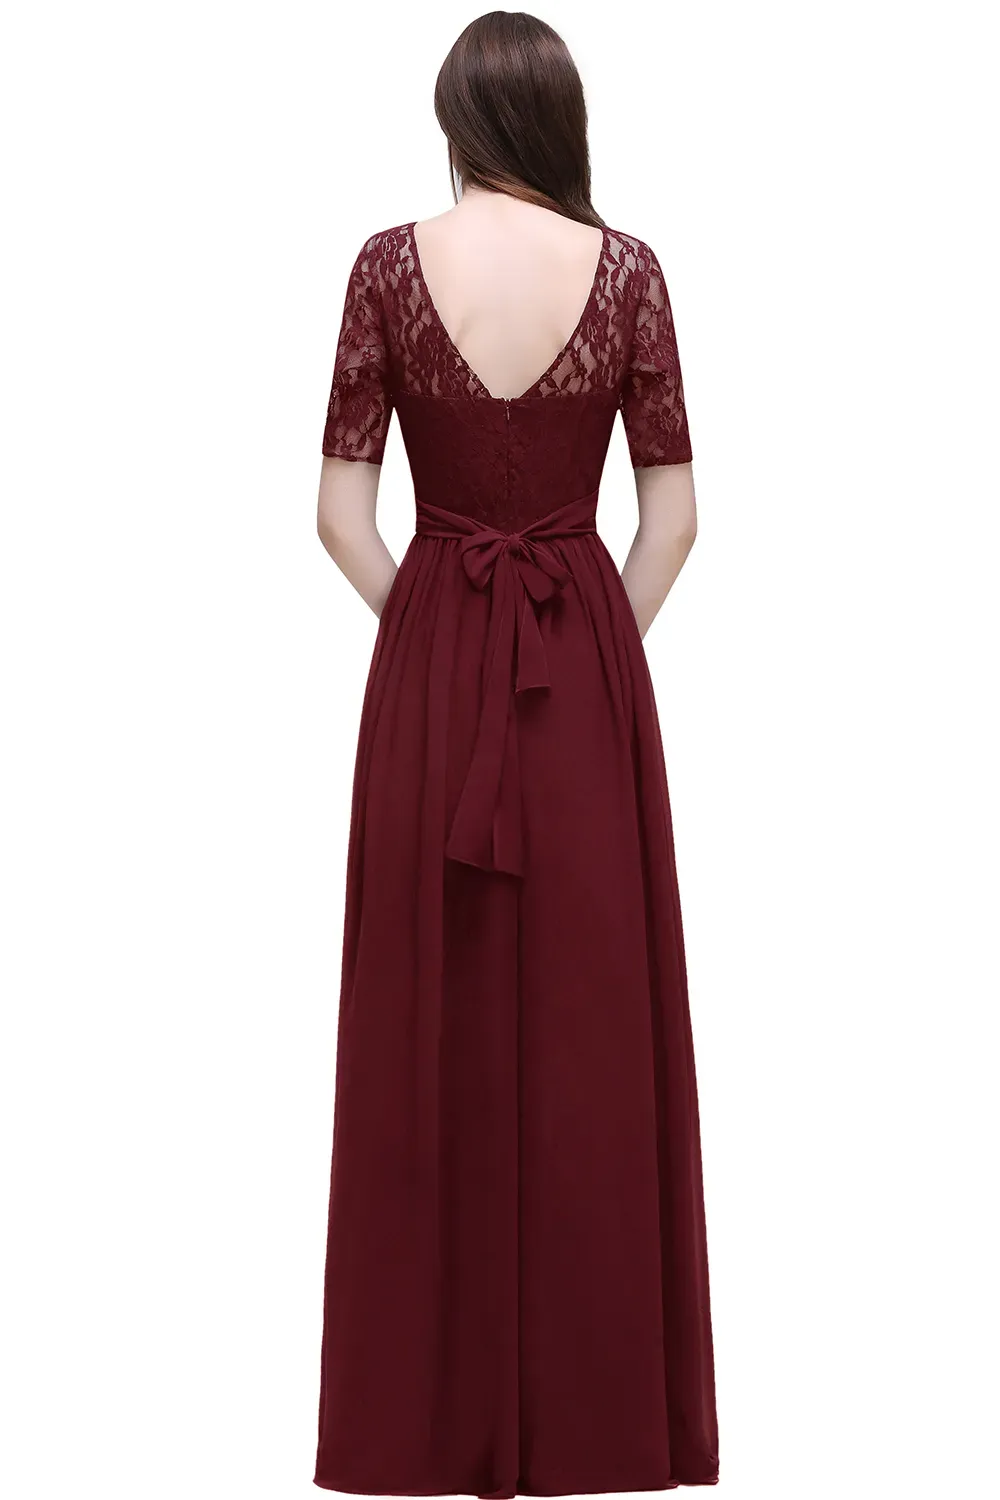 BABYONLINE Burgundy Bridesmaid Dress with a 3/4 Aleeved Chiffon Dress with Lace Bodice Illusion Sleeve Fully Lined Zip up Back CPS522